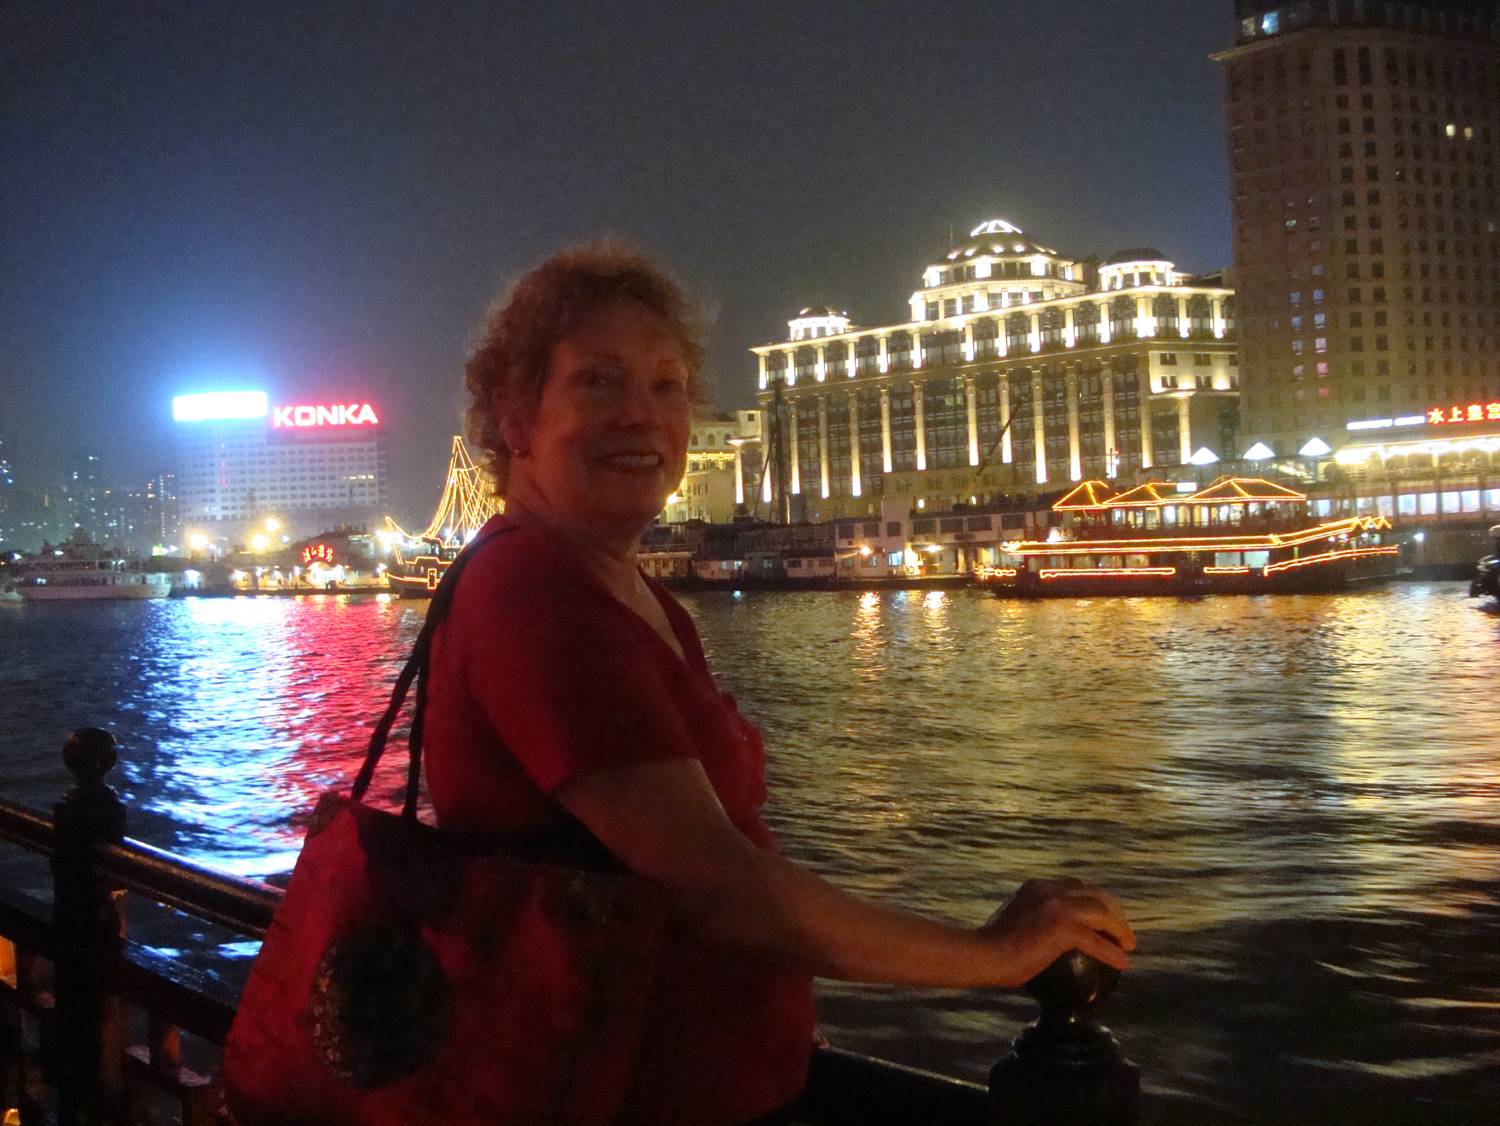 That's Shanghai in the background.  Night cruise on the Huang Pu,  Shanghai,  China